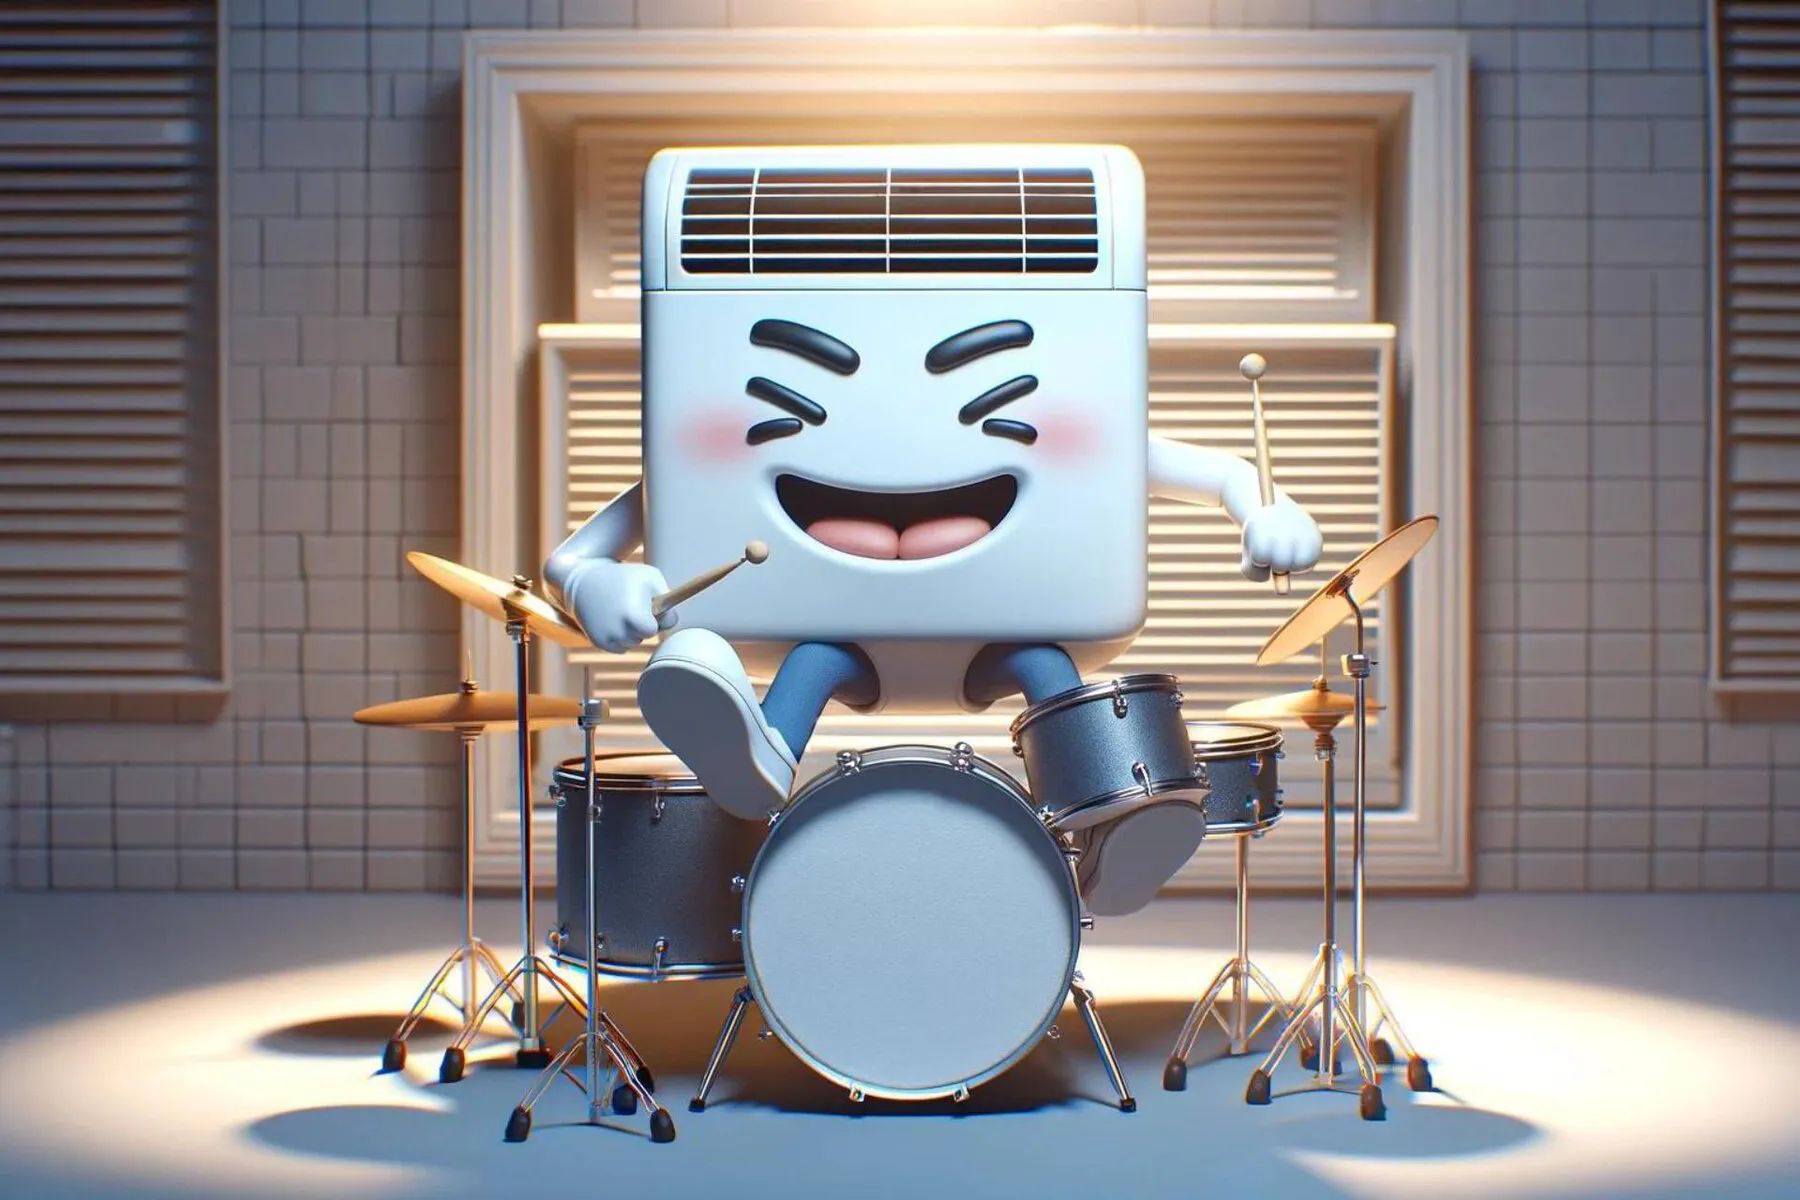 Cartoon AC unit playing the drums making a ton of noise